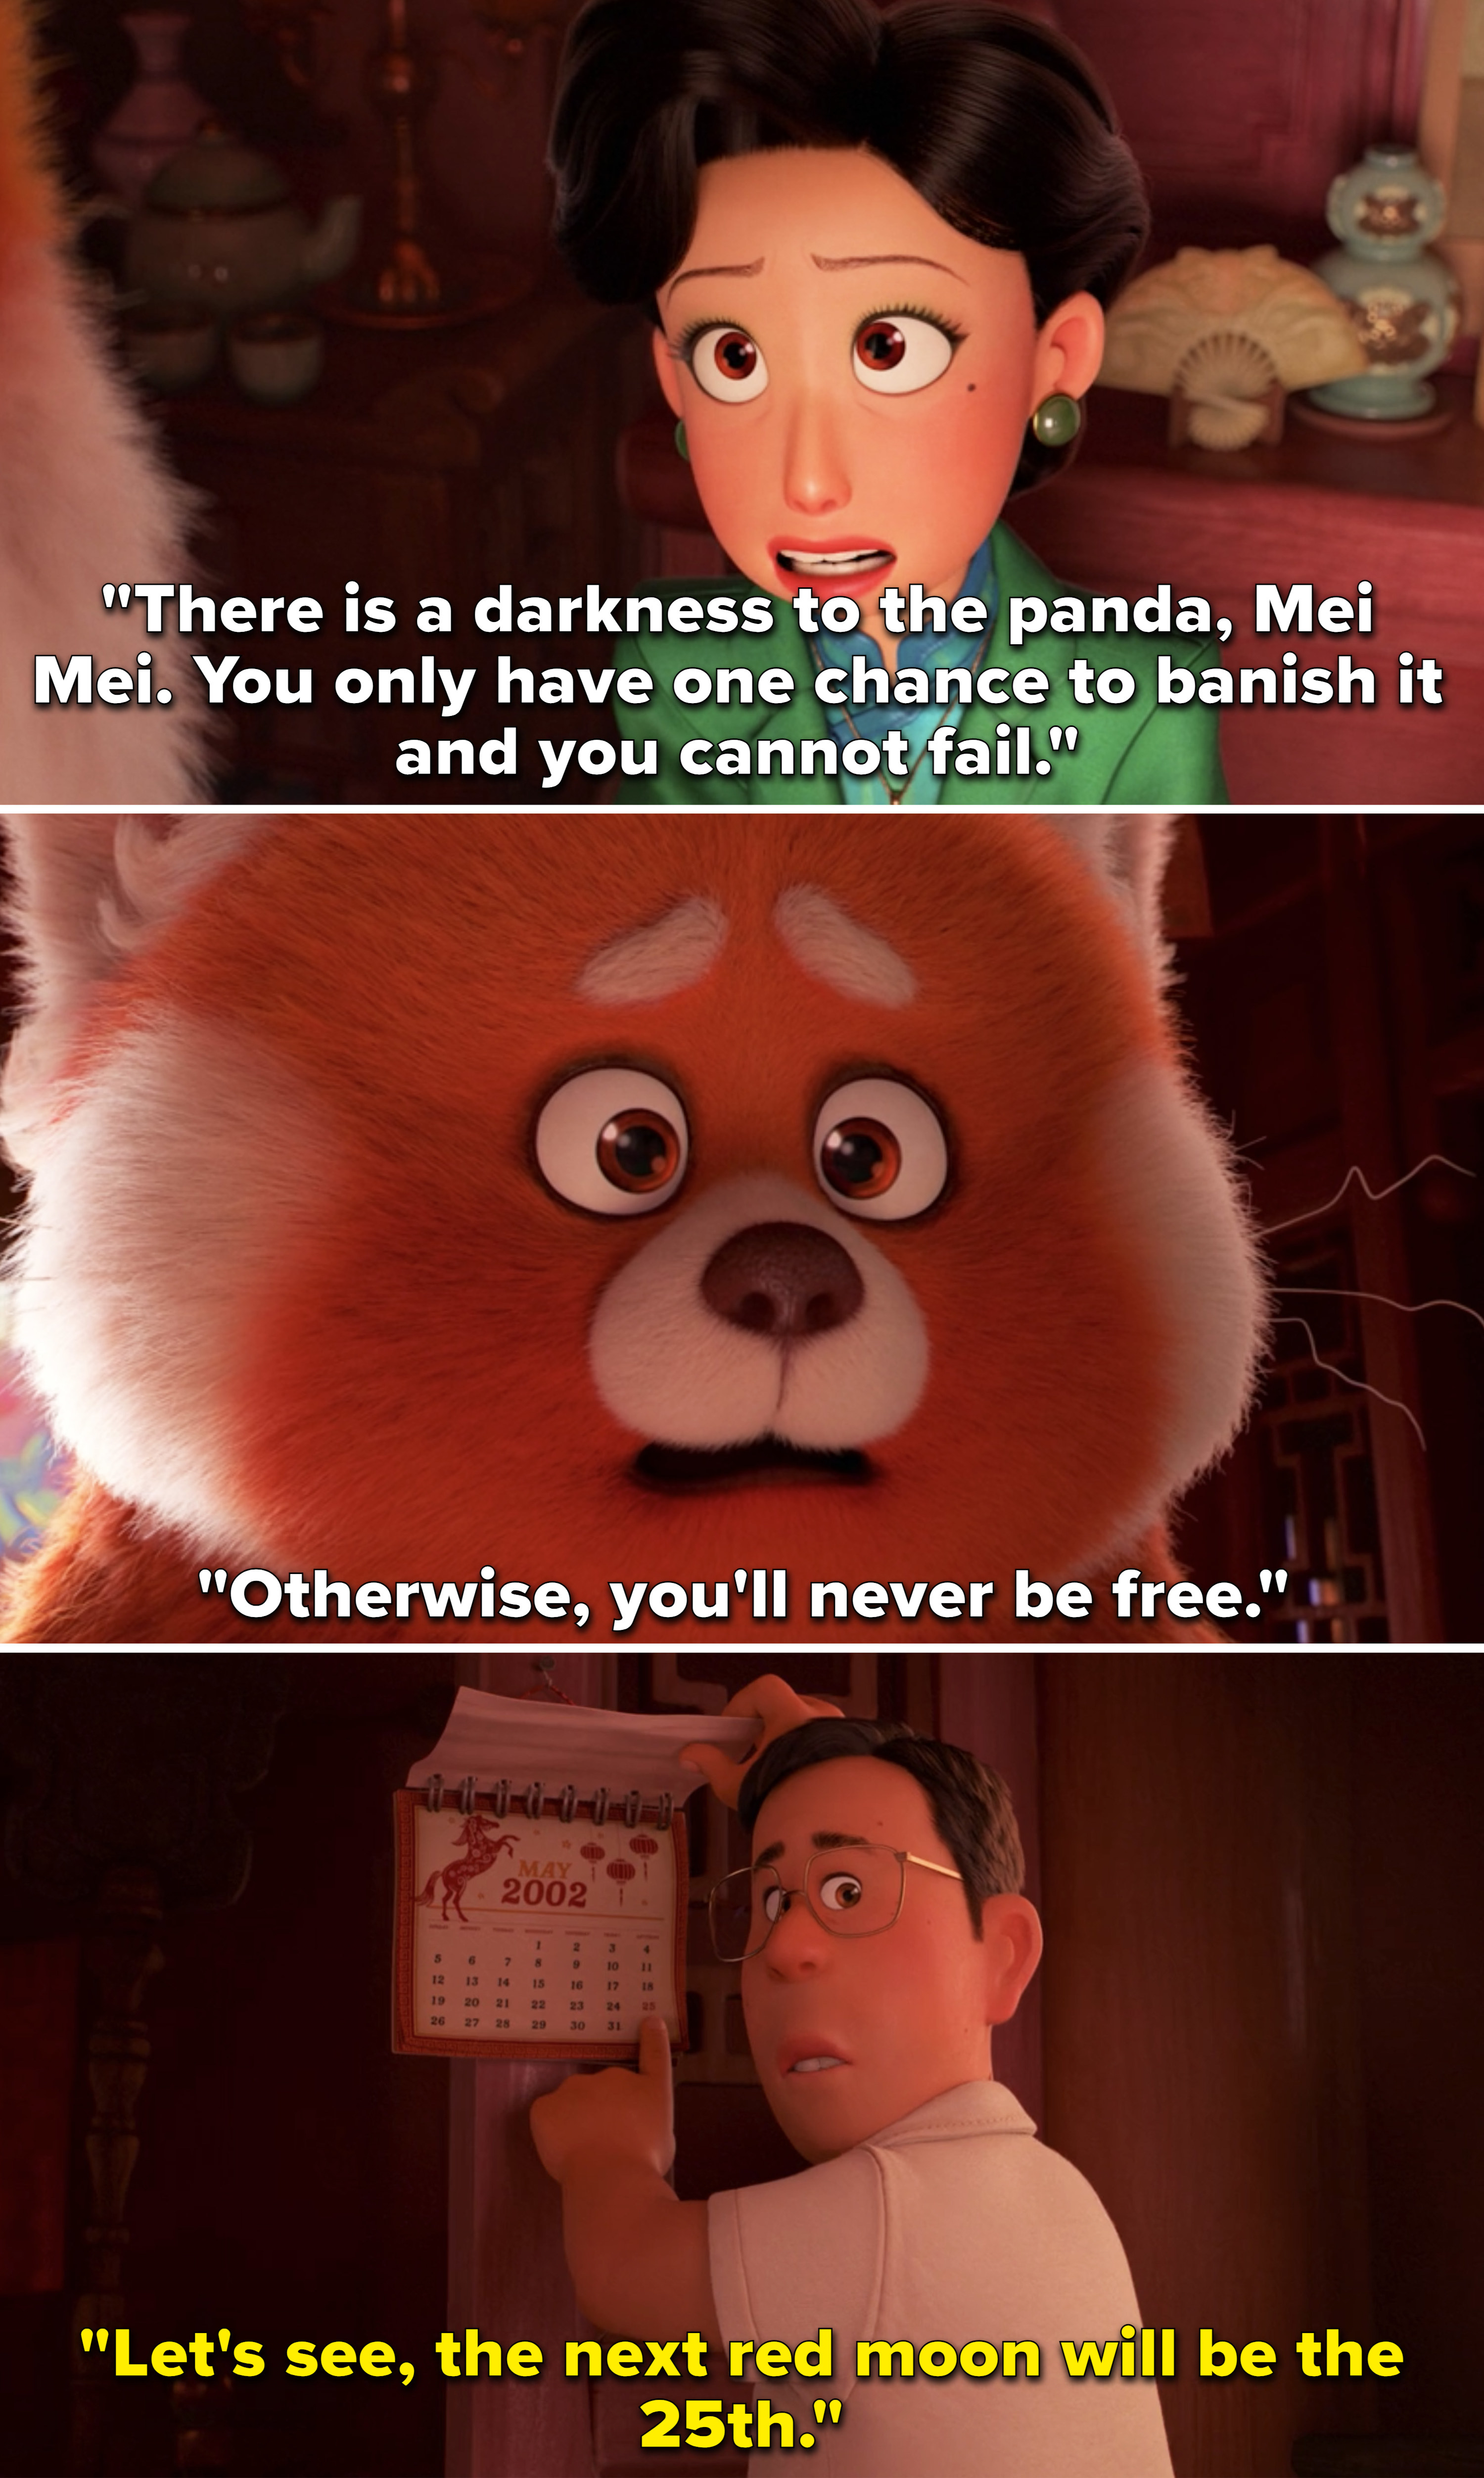 Ming telling Mei she must contain the panda, and Jin explaining the next red moon is on the 25th